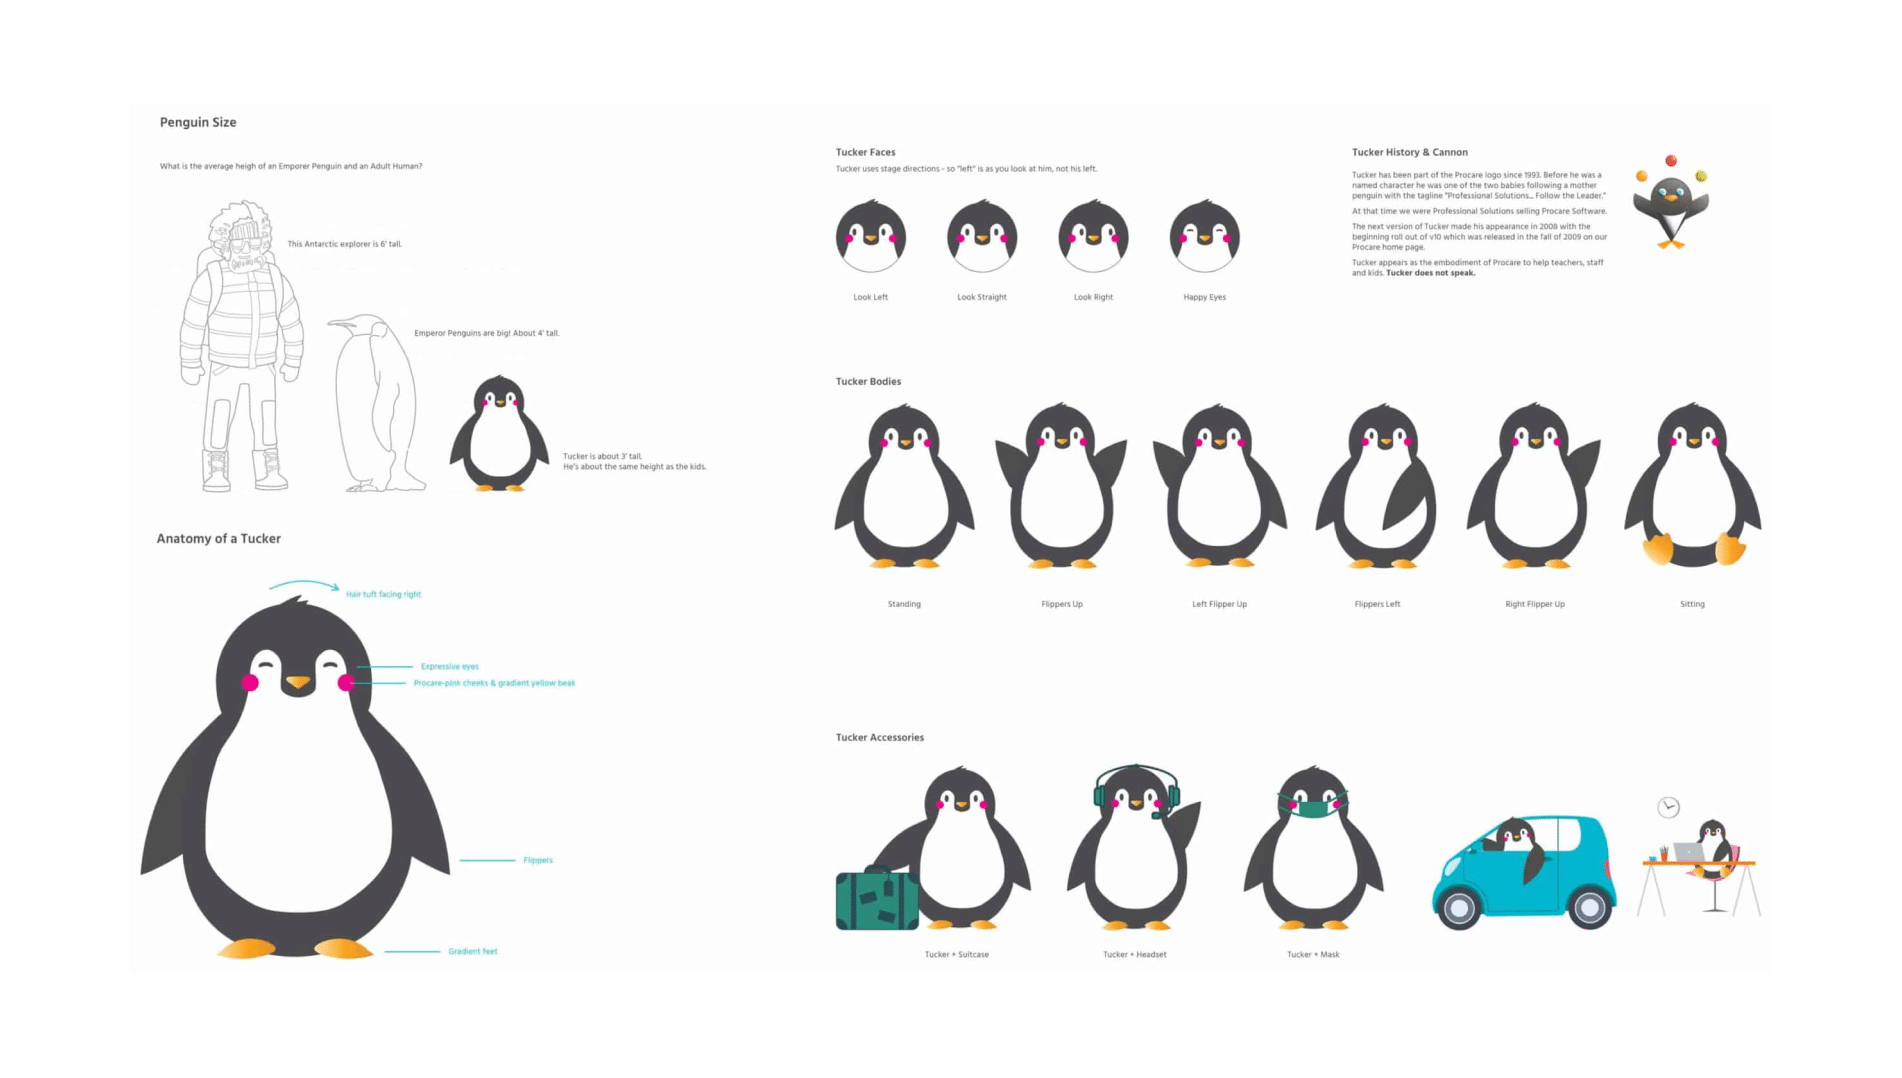 Component sheet showing details of stylized penguin character